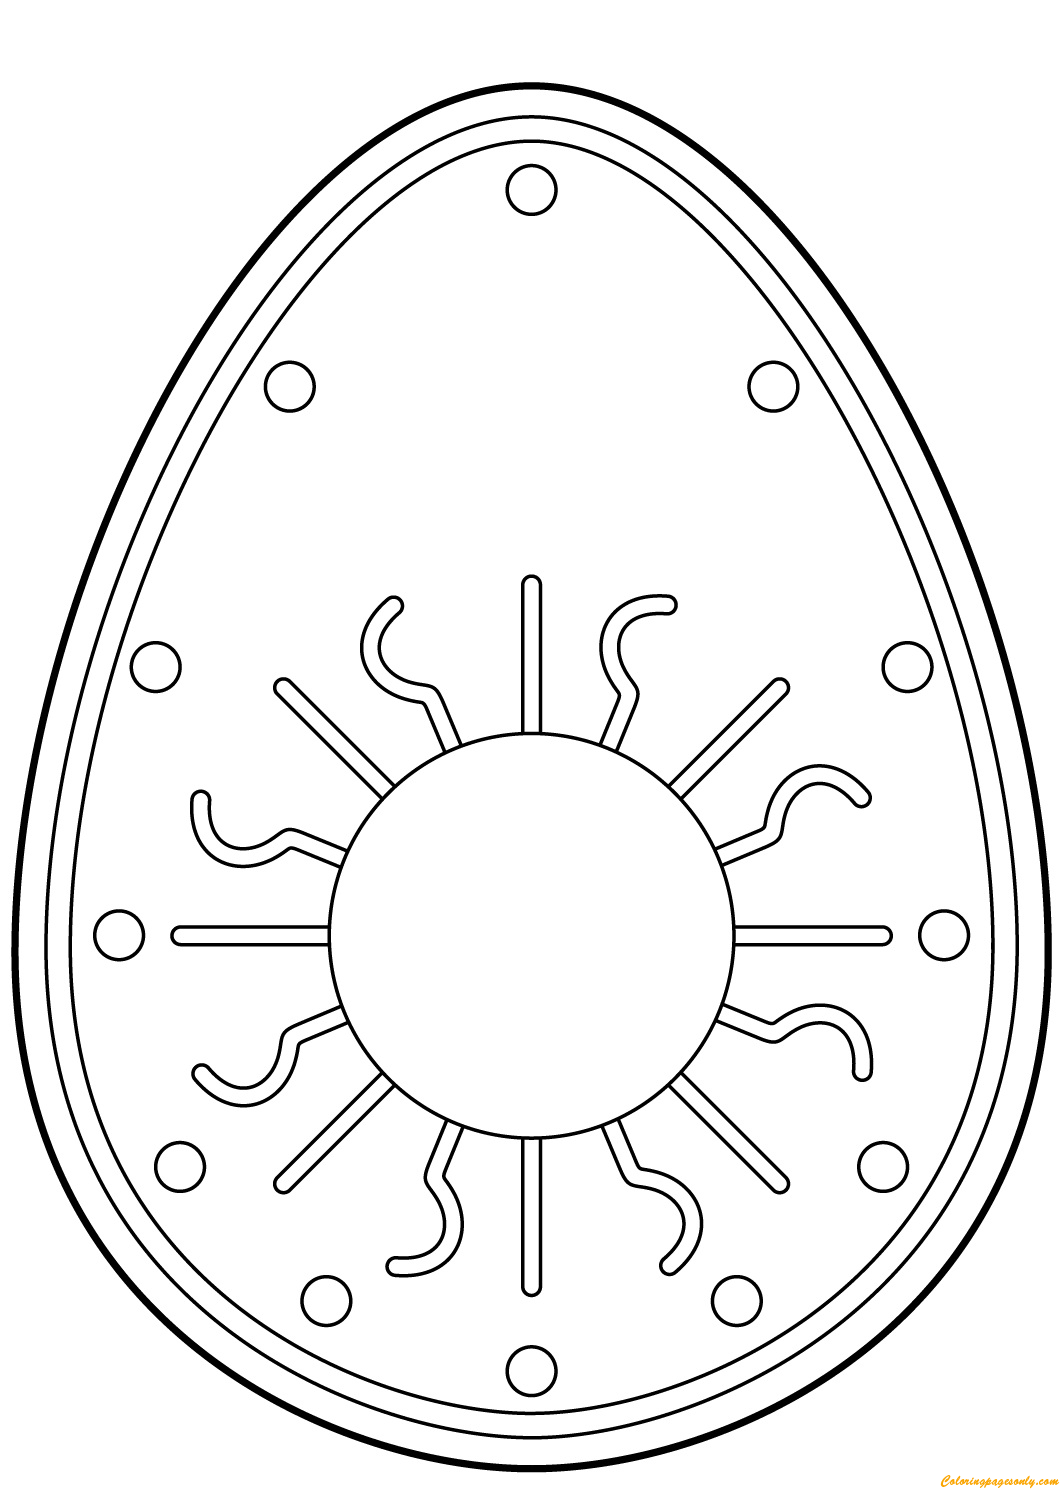 Easter Egg with Sun Pattern Coloring Pages